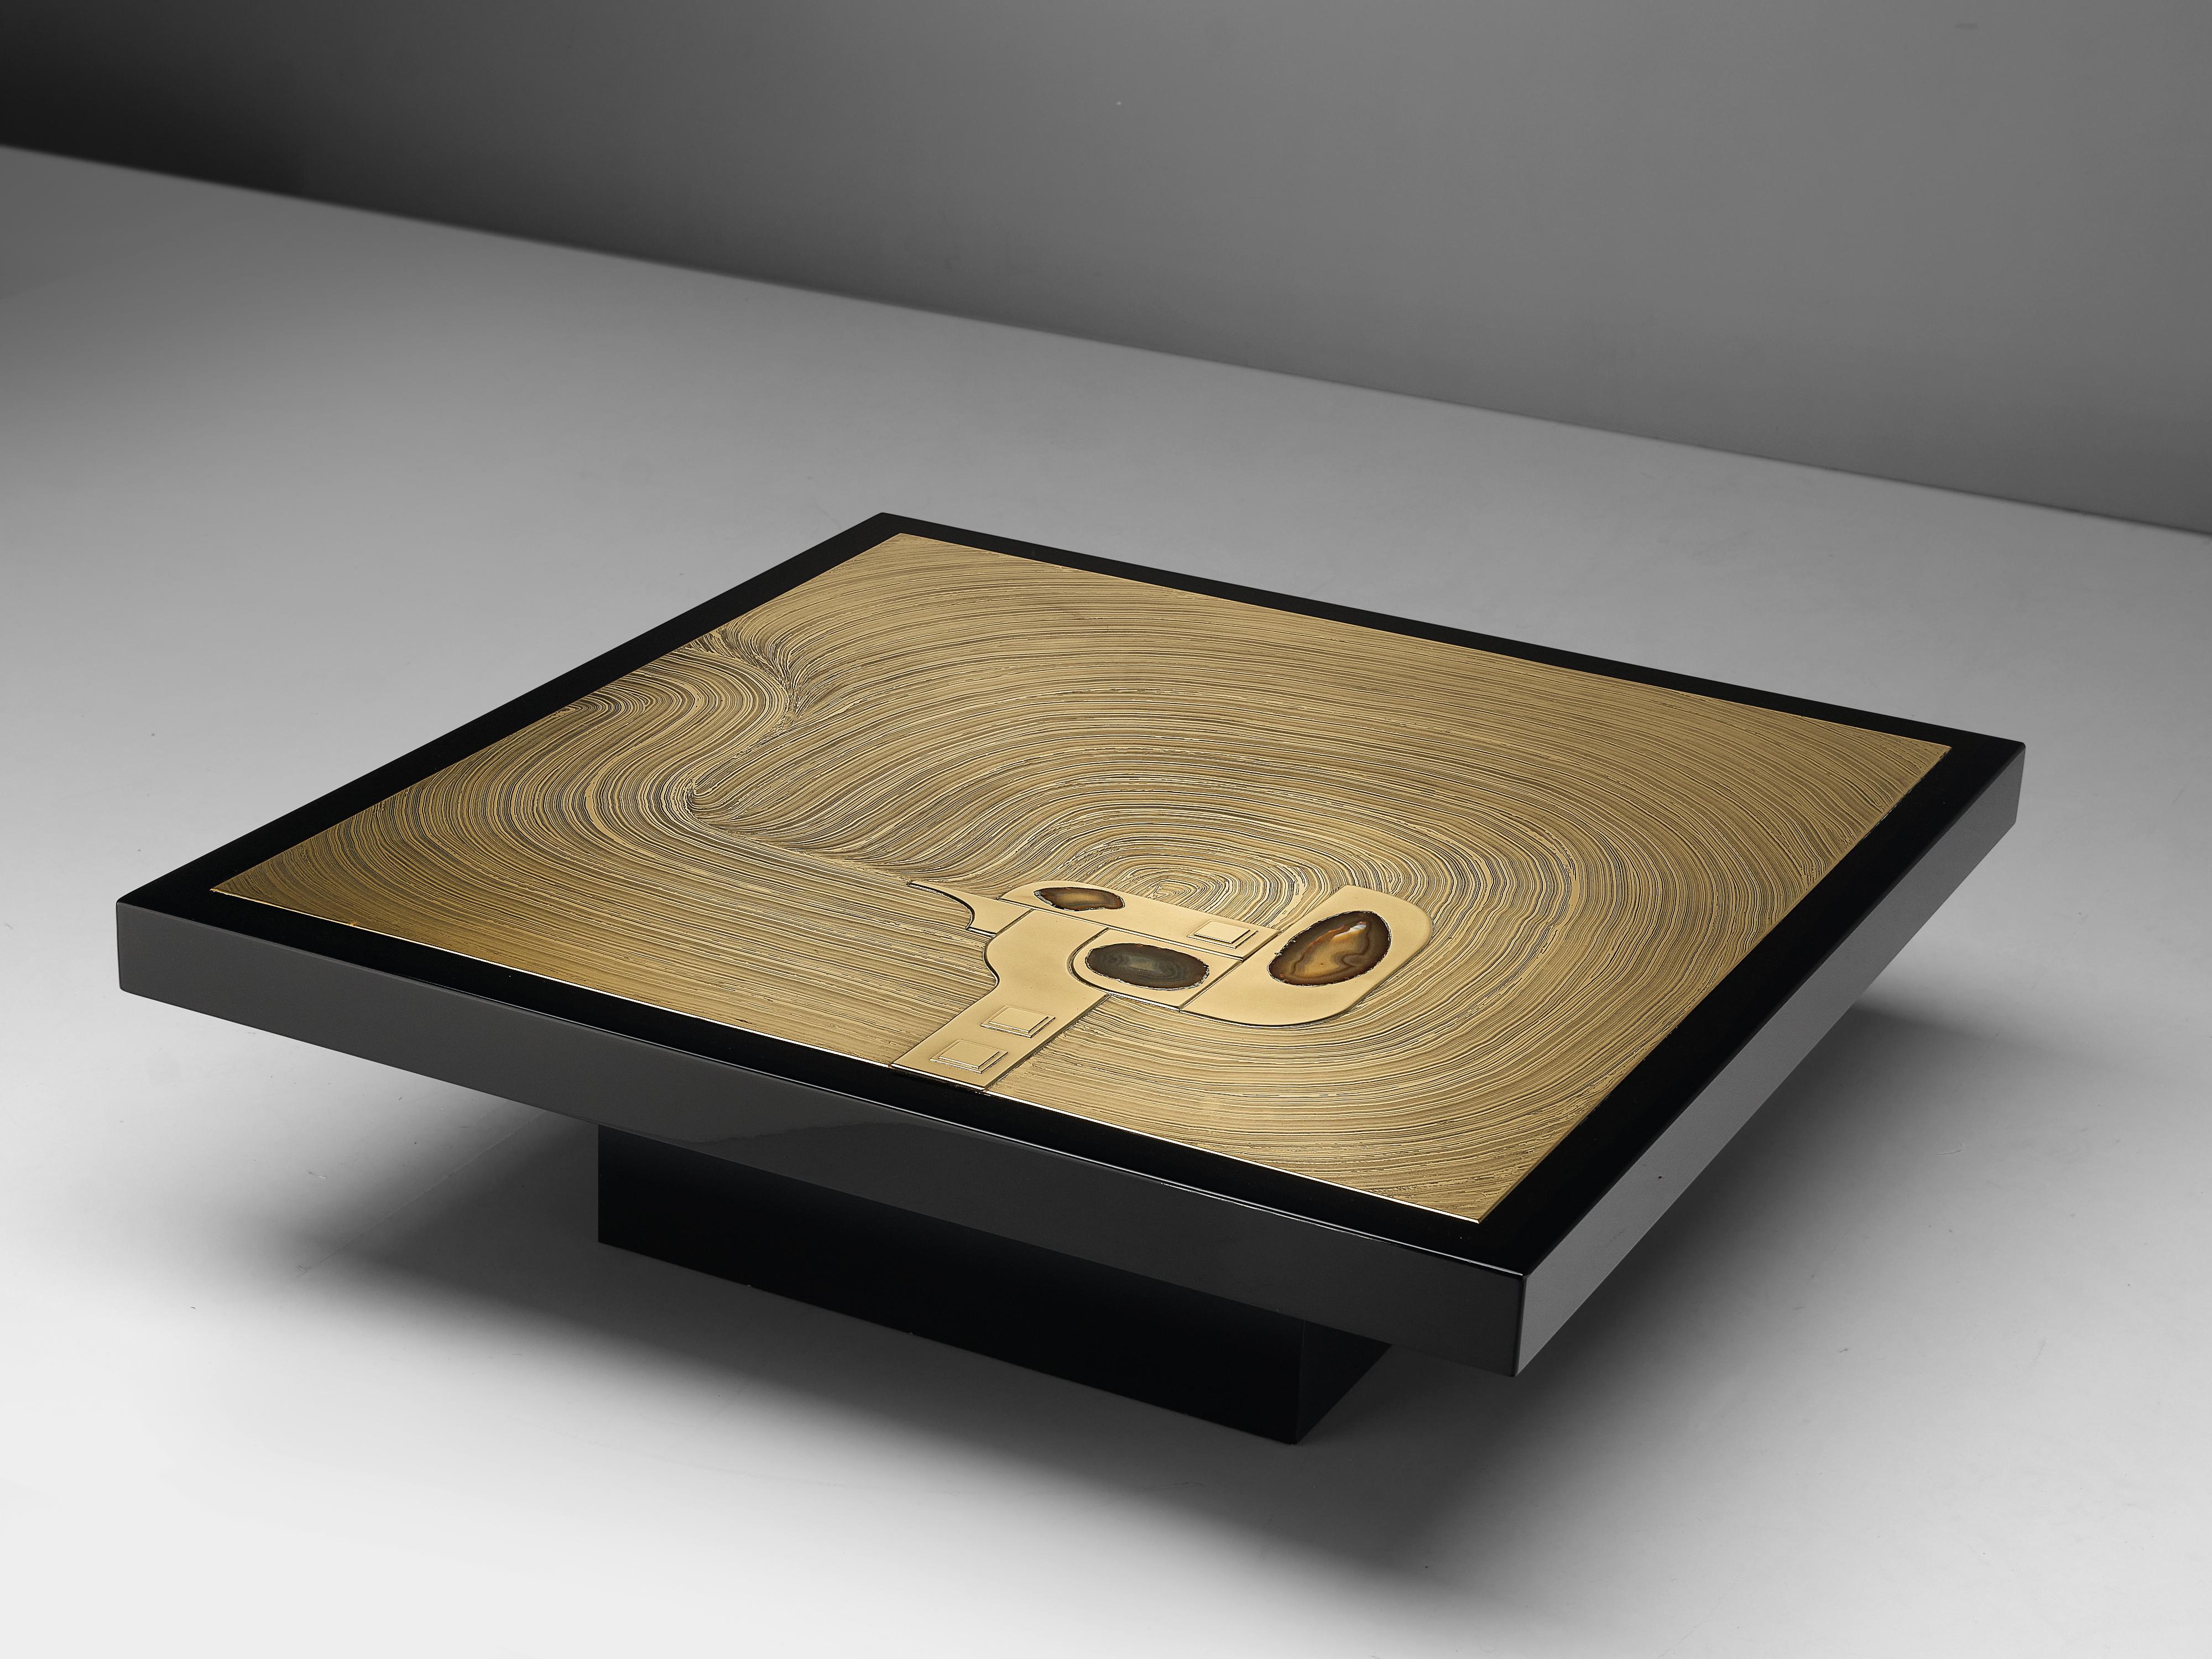 Jean Claude Dresse, coffee table, brass, steel and agate, Belgium, circa 1970.

A luxurious square cocktail table, crafted with high attention for detail which is characteristic for the work of the Belgian artist Jean Claude Dresse. The piece is